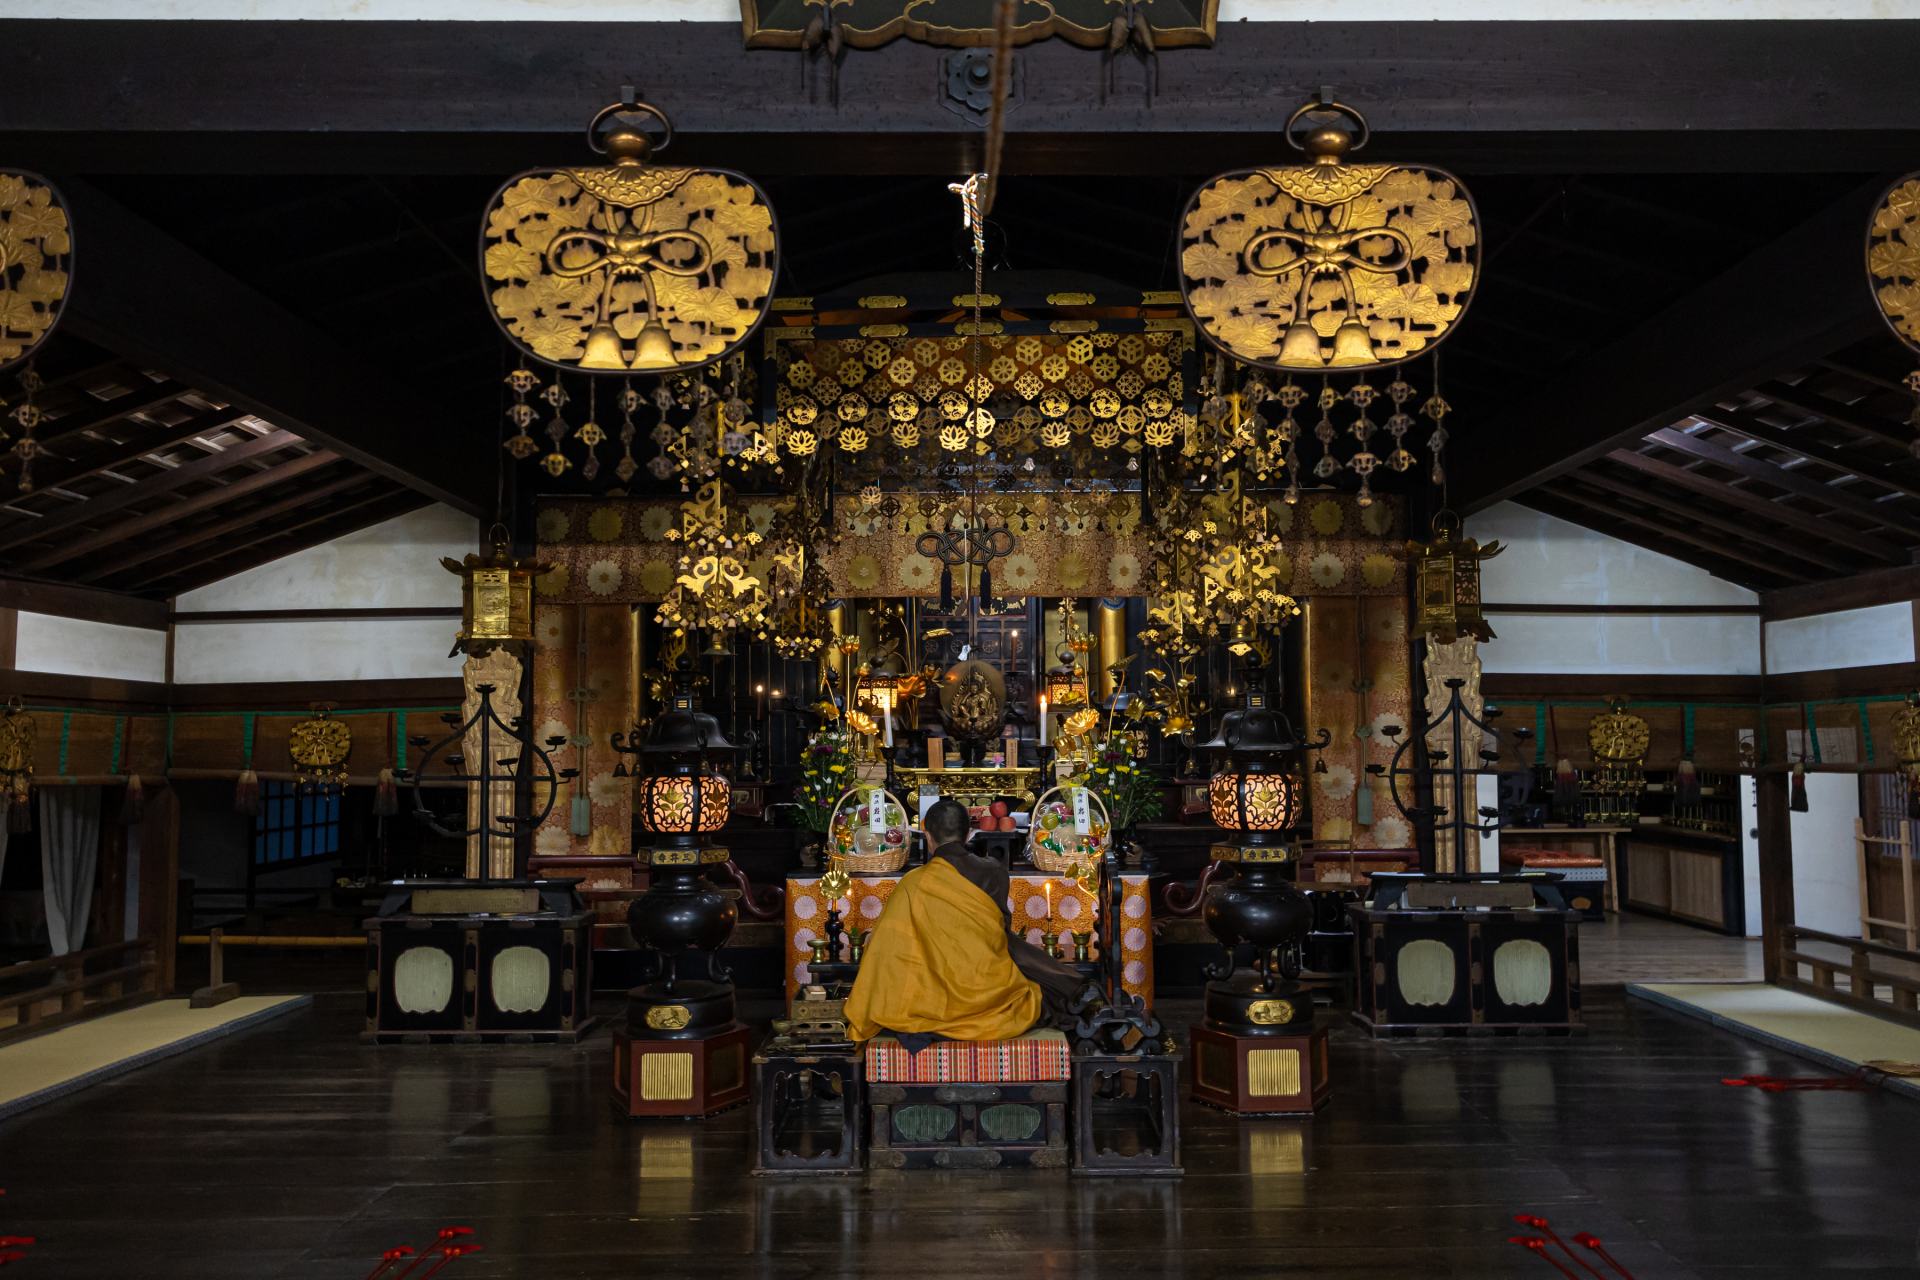 The priest begins the ritual in the stunning Kannon-do Hall.